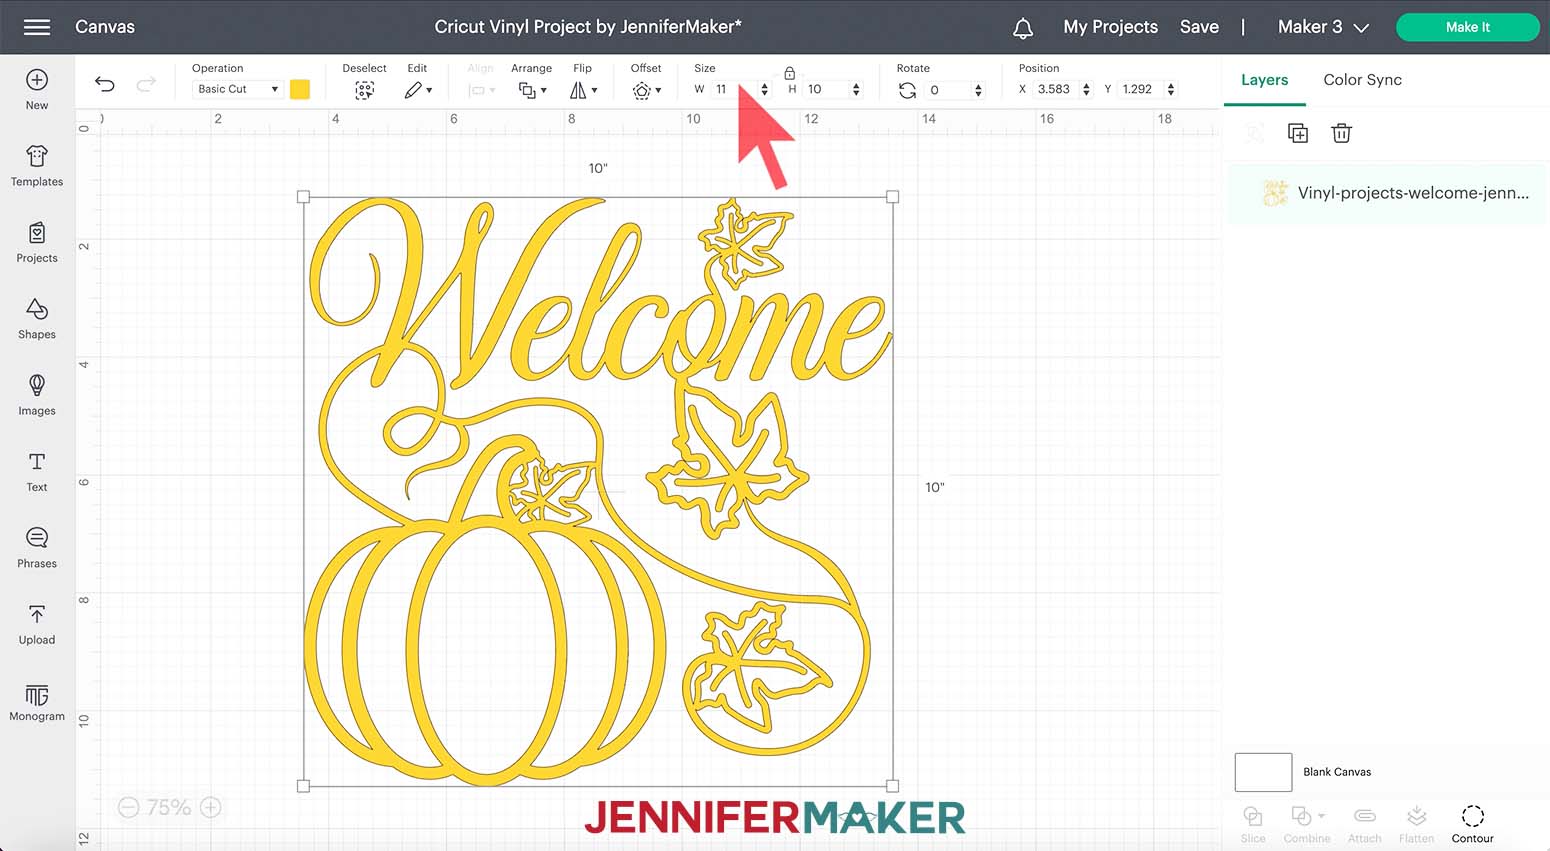 Screenshot of Cricut Design Space Canvas showing the Welcome design has been changed to a yellow color from black.